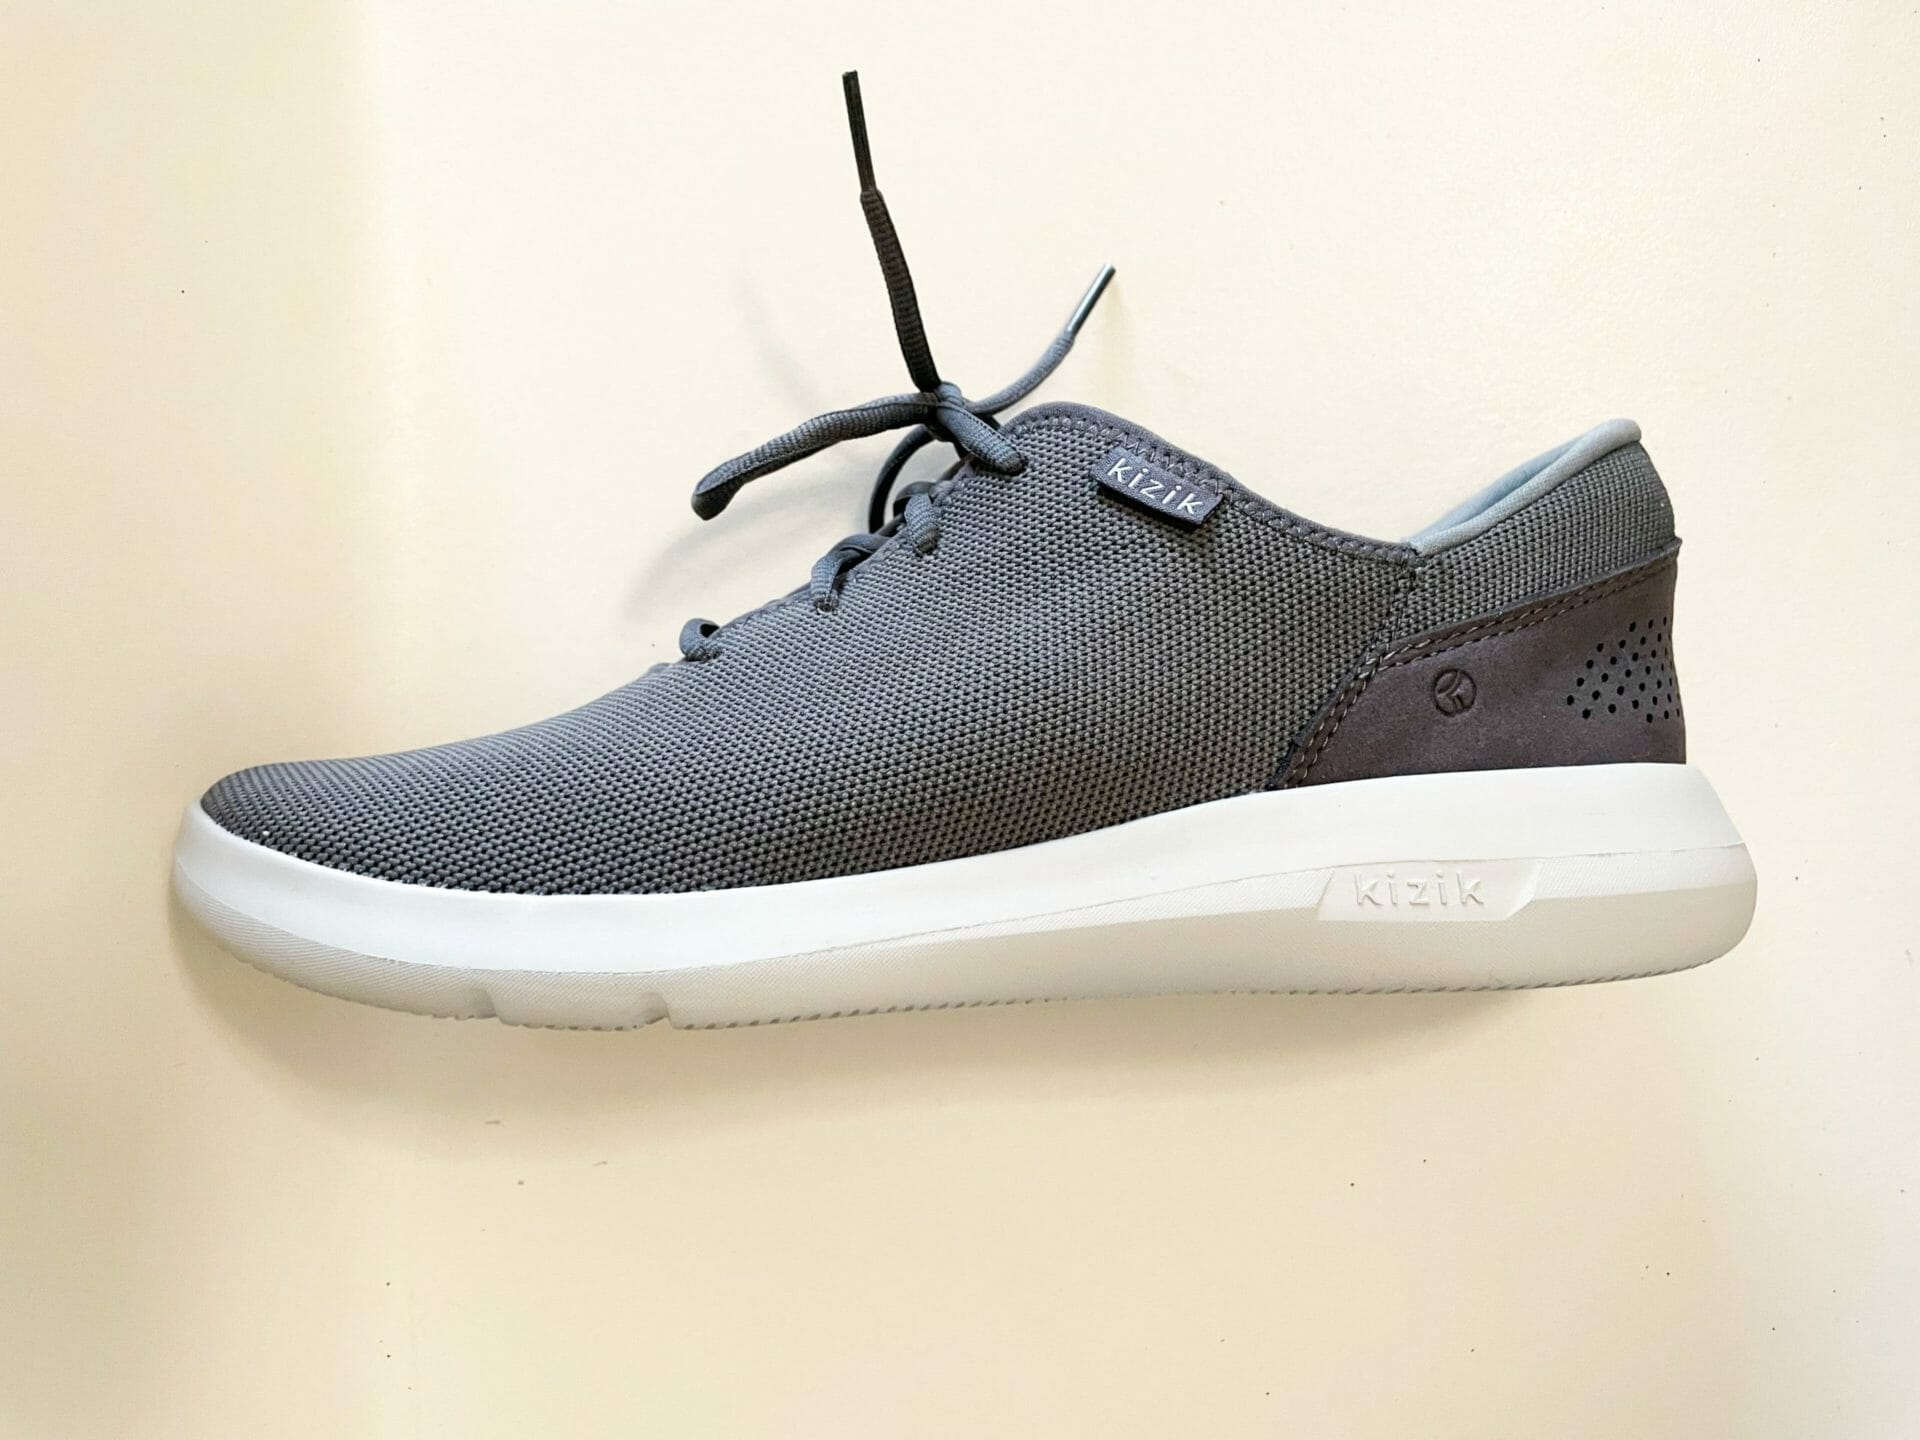 Featured image for “Kizik Shoes Review: Slip Ons for Lazy People – Gimmick or greatest shoe invention ever?”